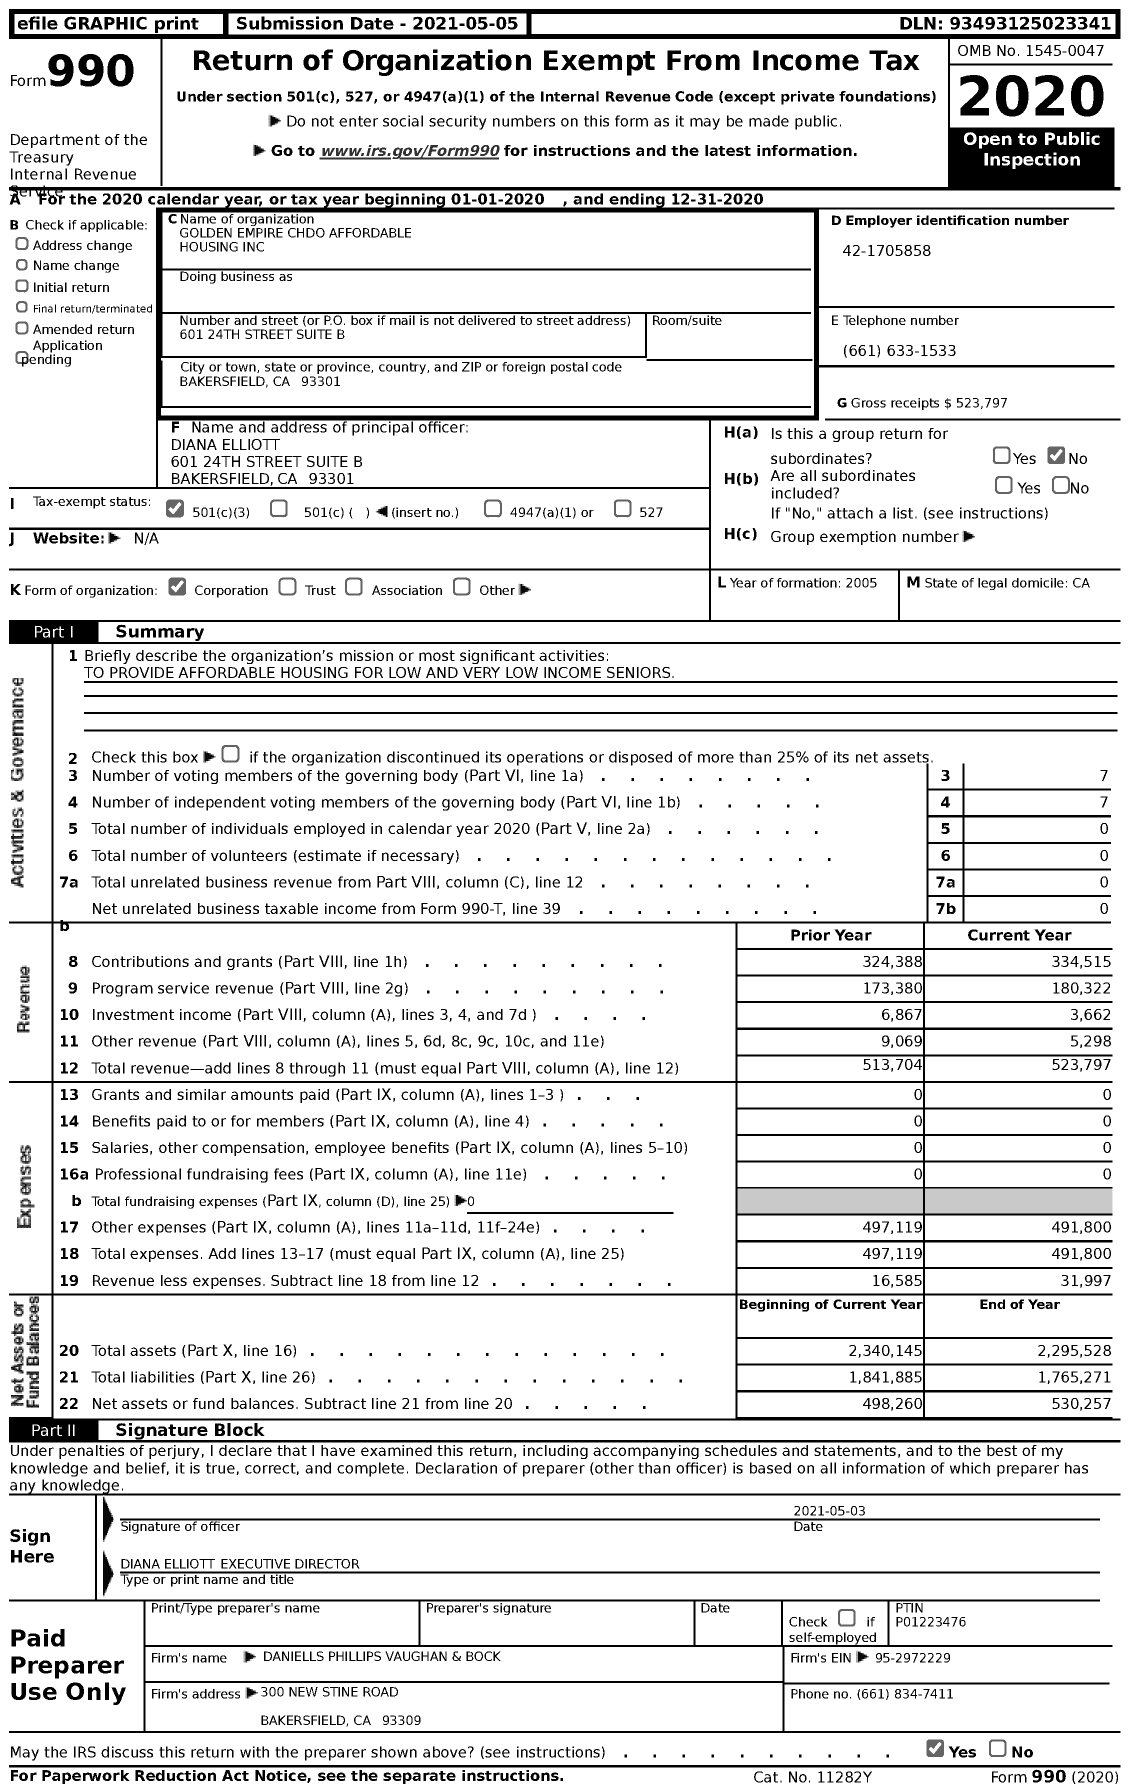 Image of first page of 2020 Form 990 for Golden Empire Chdo Affordable Housing